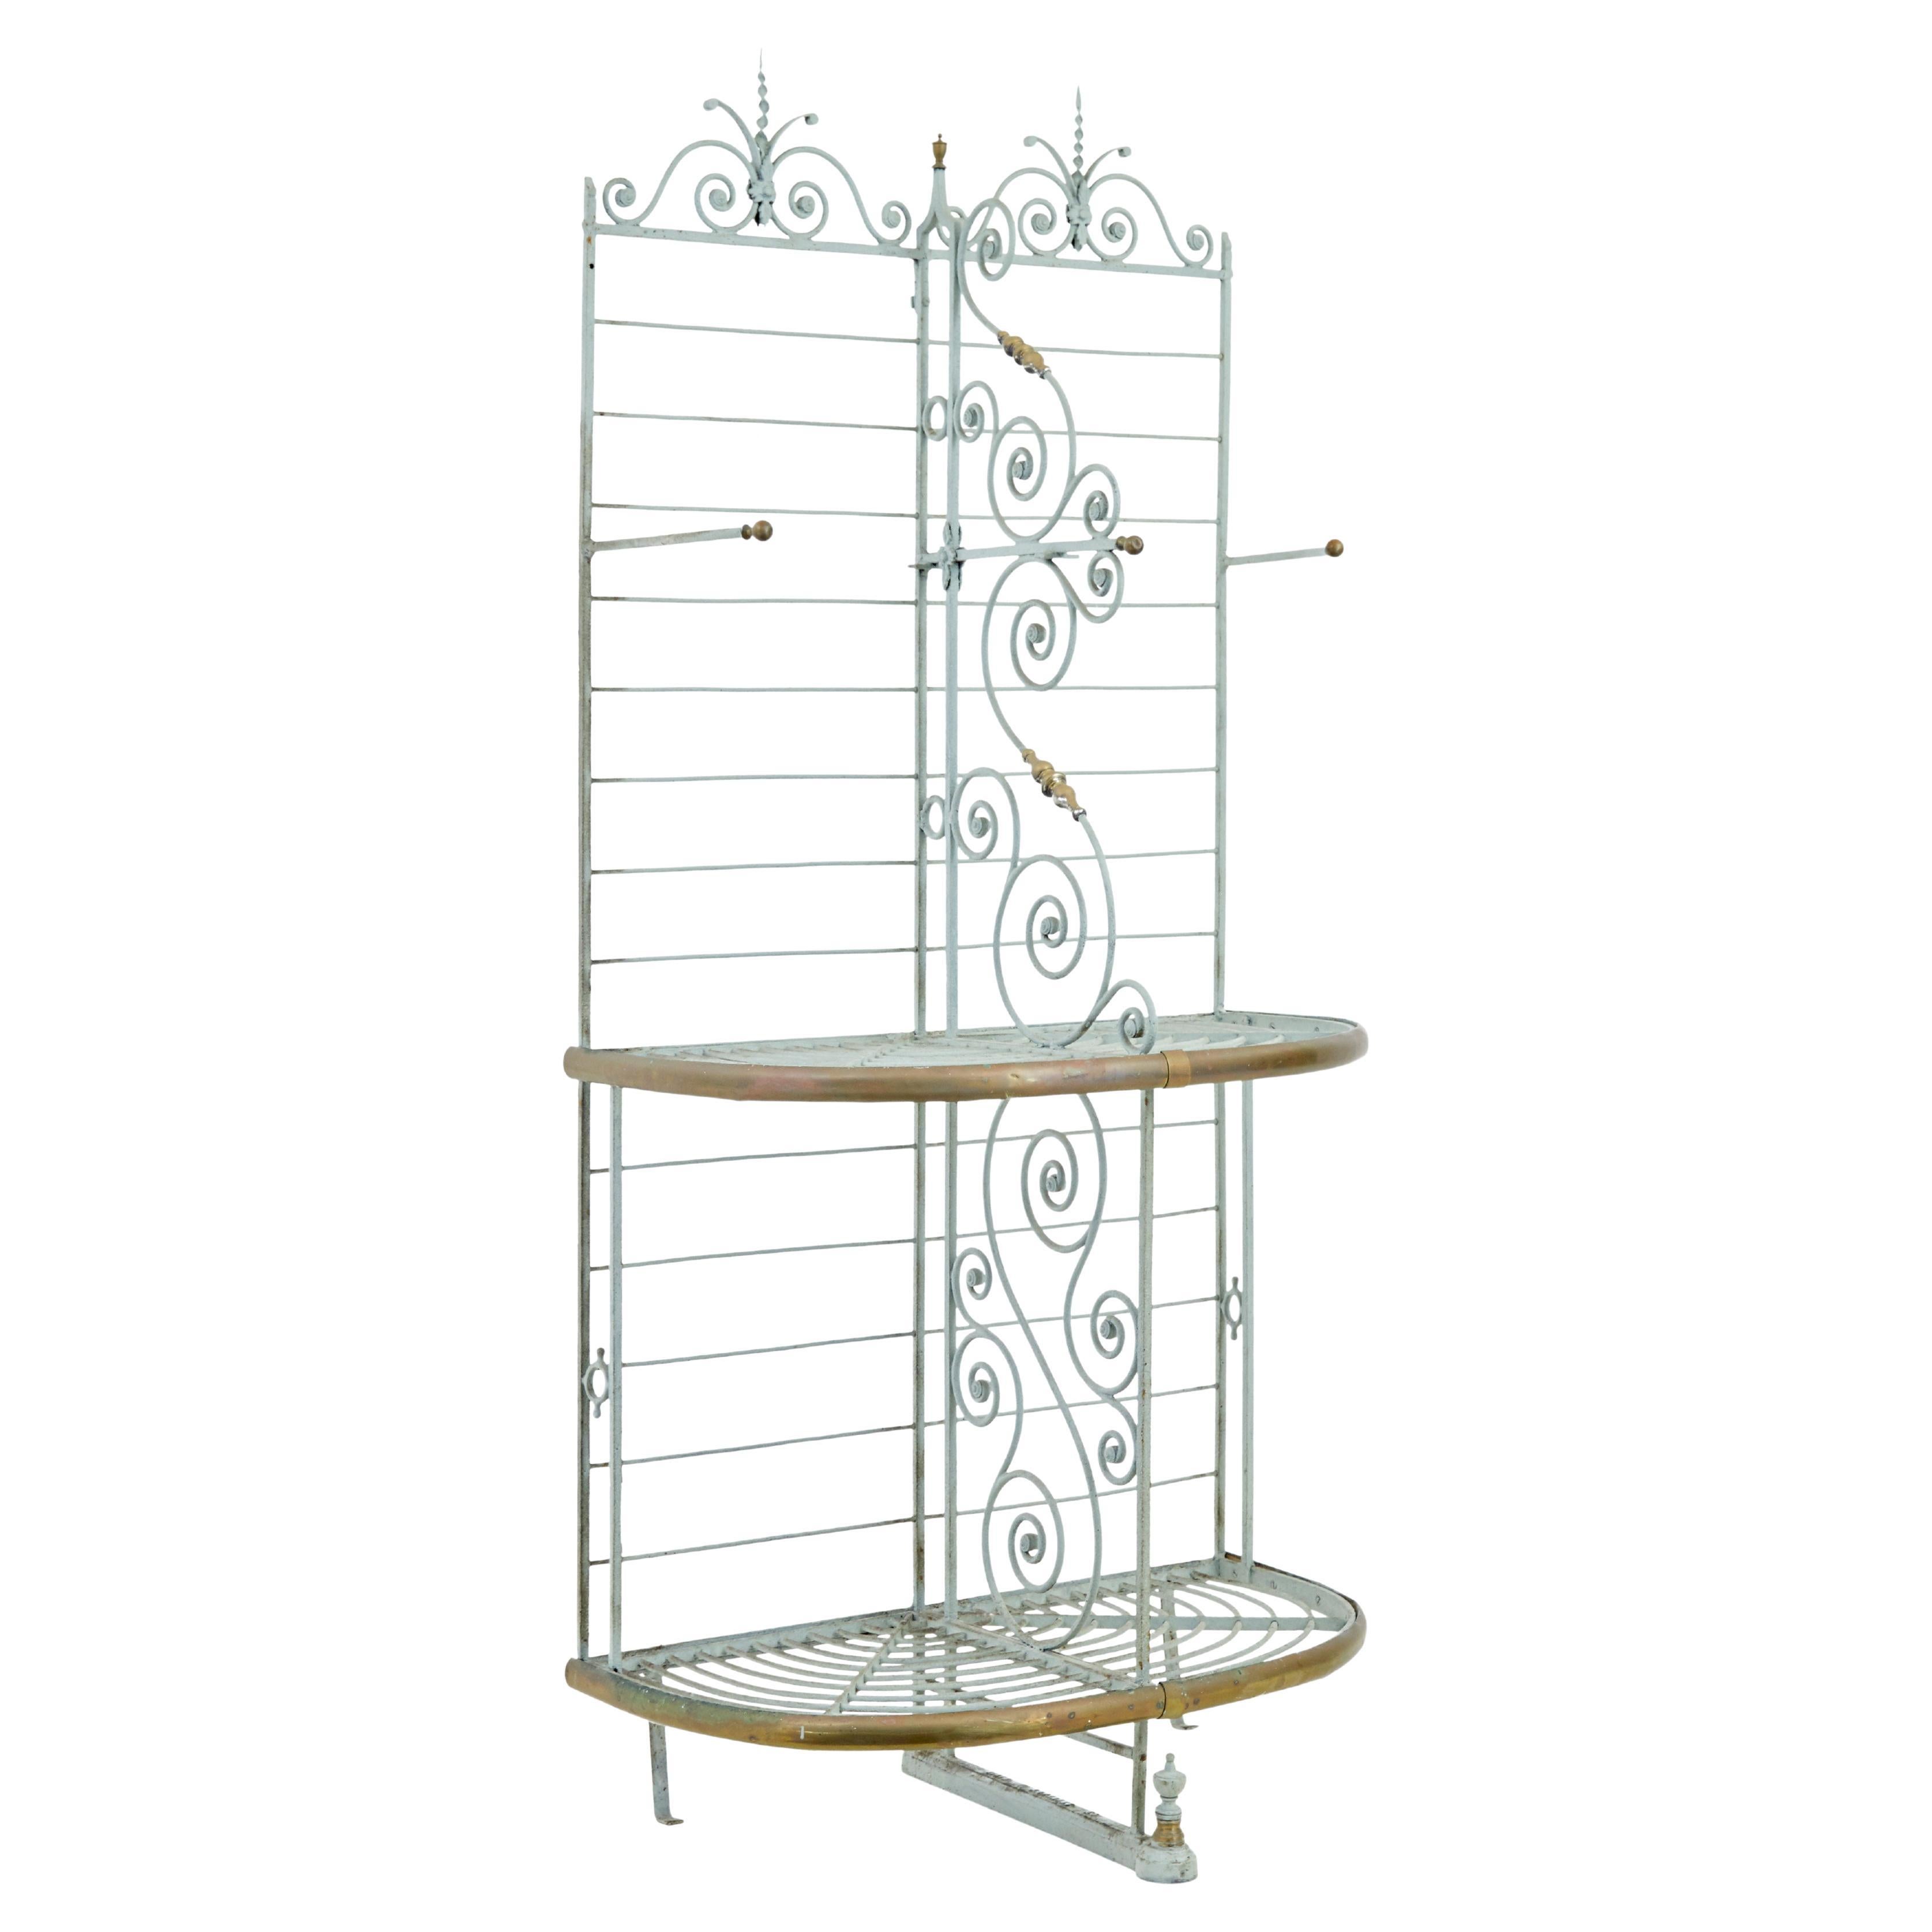 Early 20th century French Parisienne boulangers bread rack